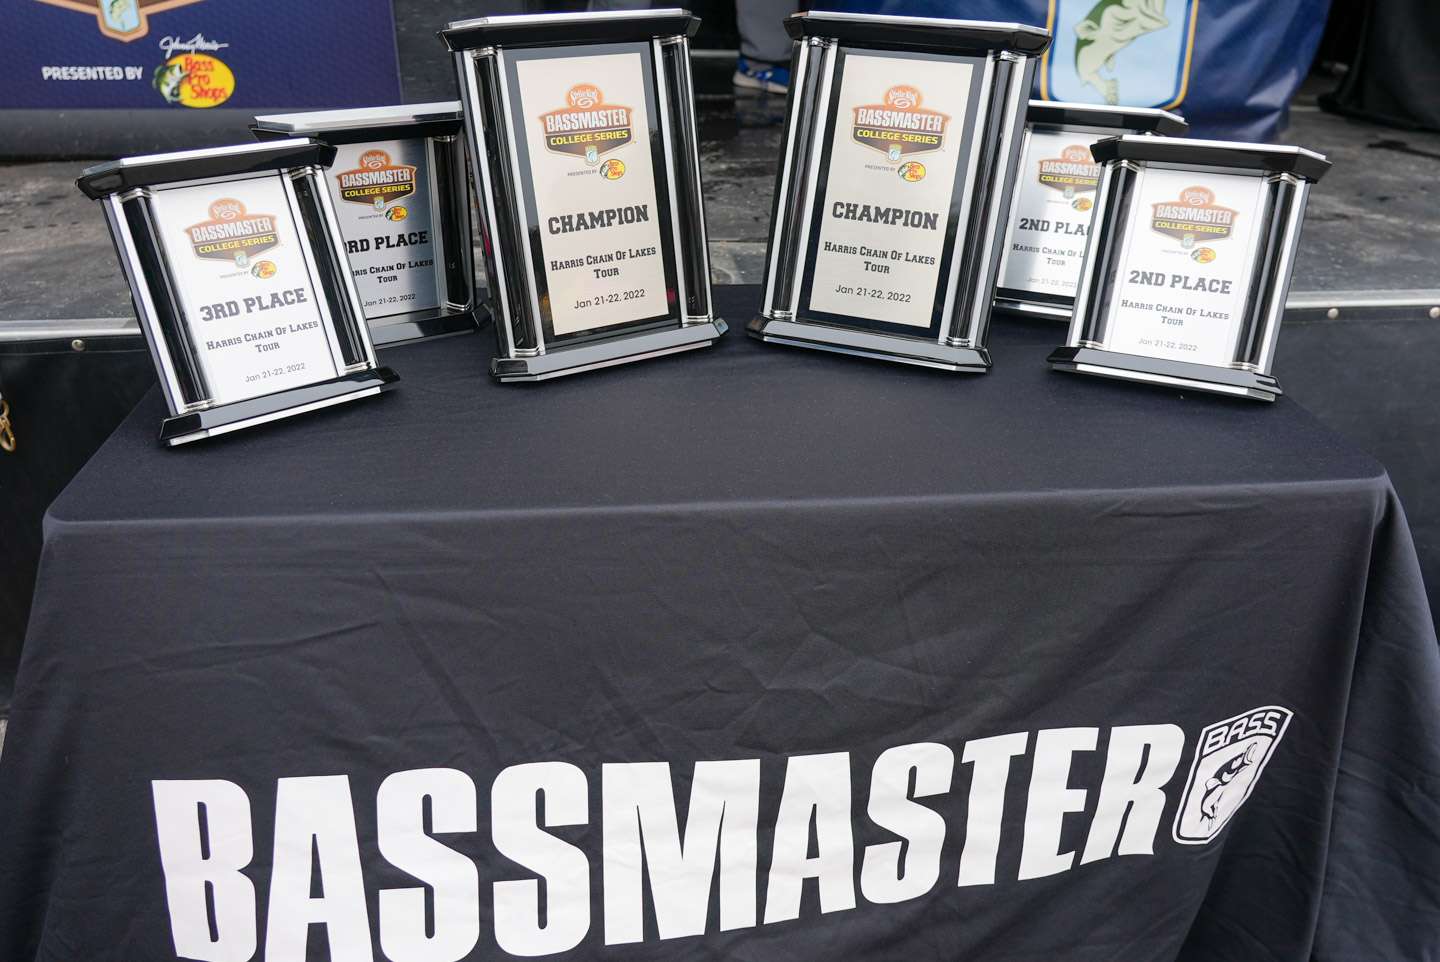 Check out the final day weigh-in of the 2022 Strike King Bassmaster College Series at Harris Chain presented by Bass Pro Shops. 